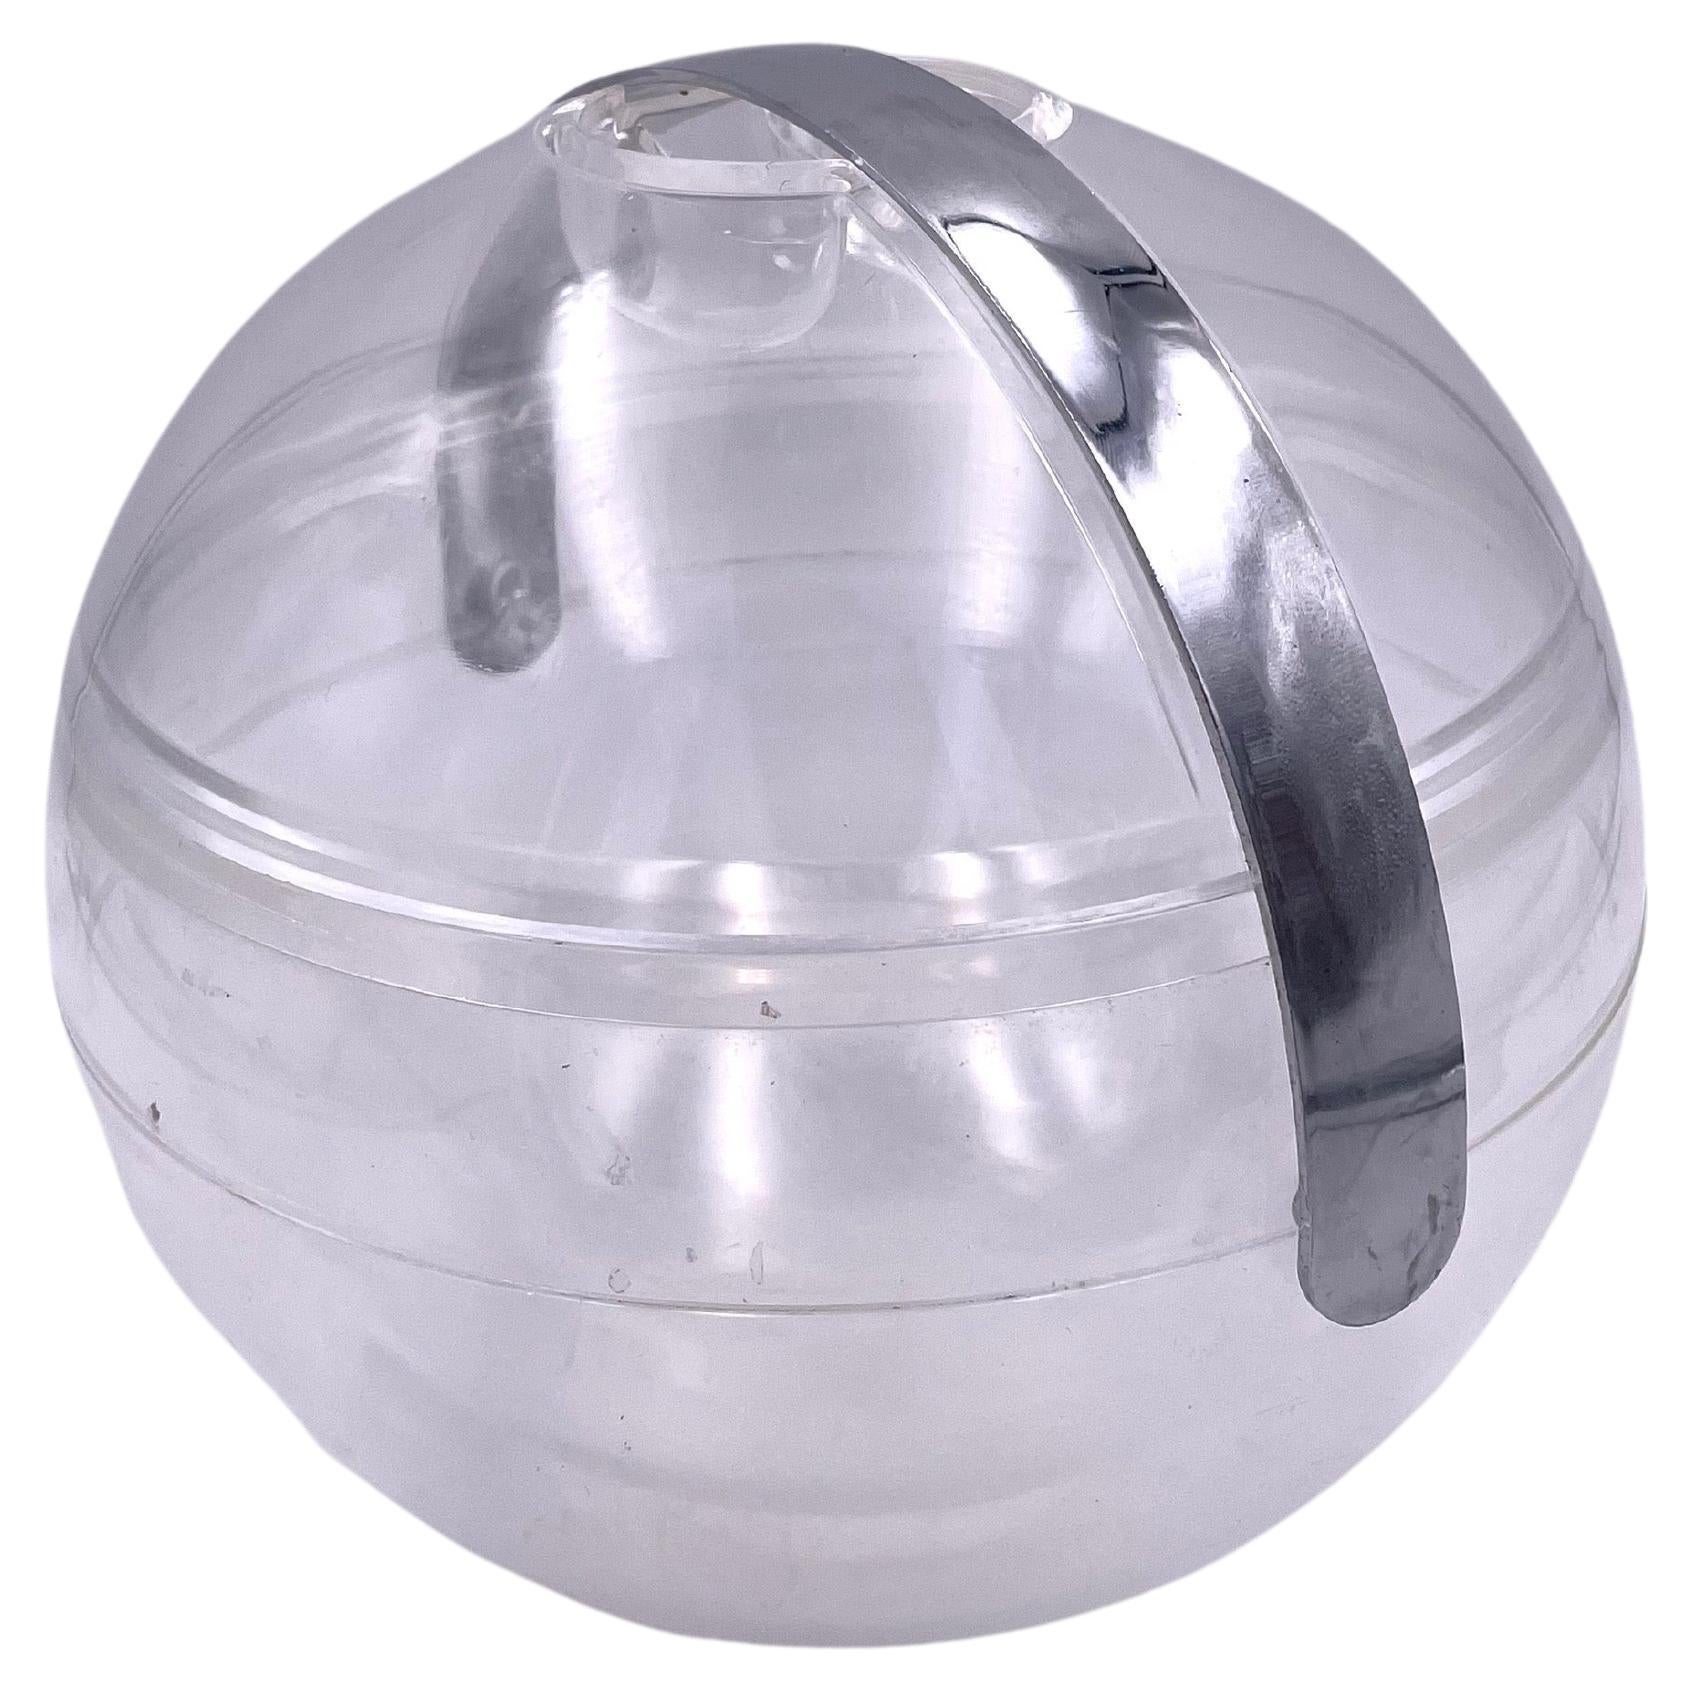 Iconic Space Age Lucite Ice Bucket Designed by Paolo Tilche for Guzzini Italy For Sale